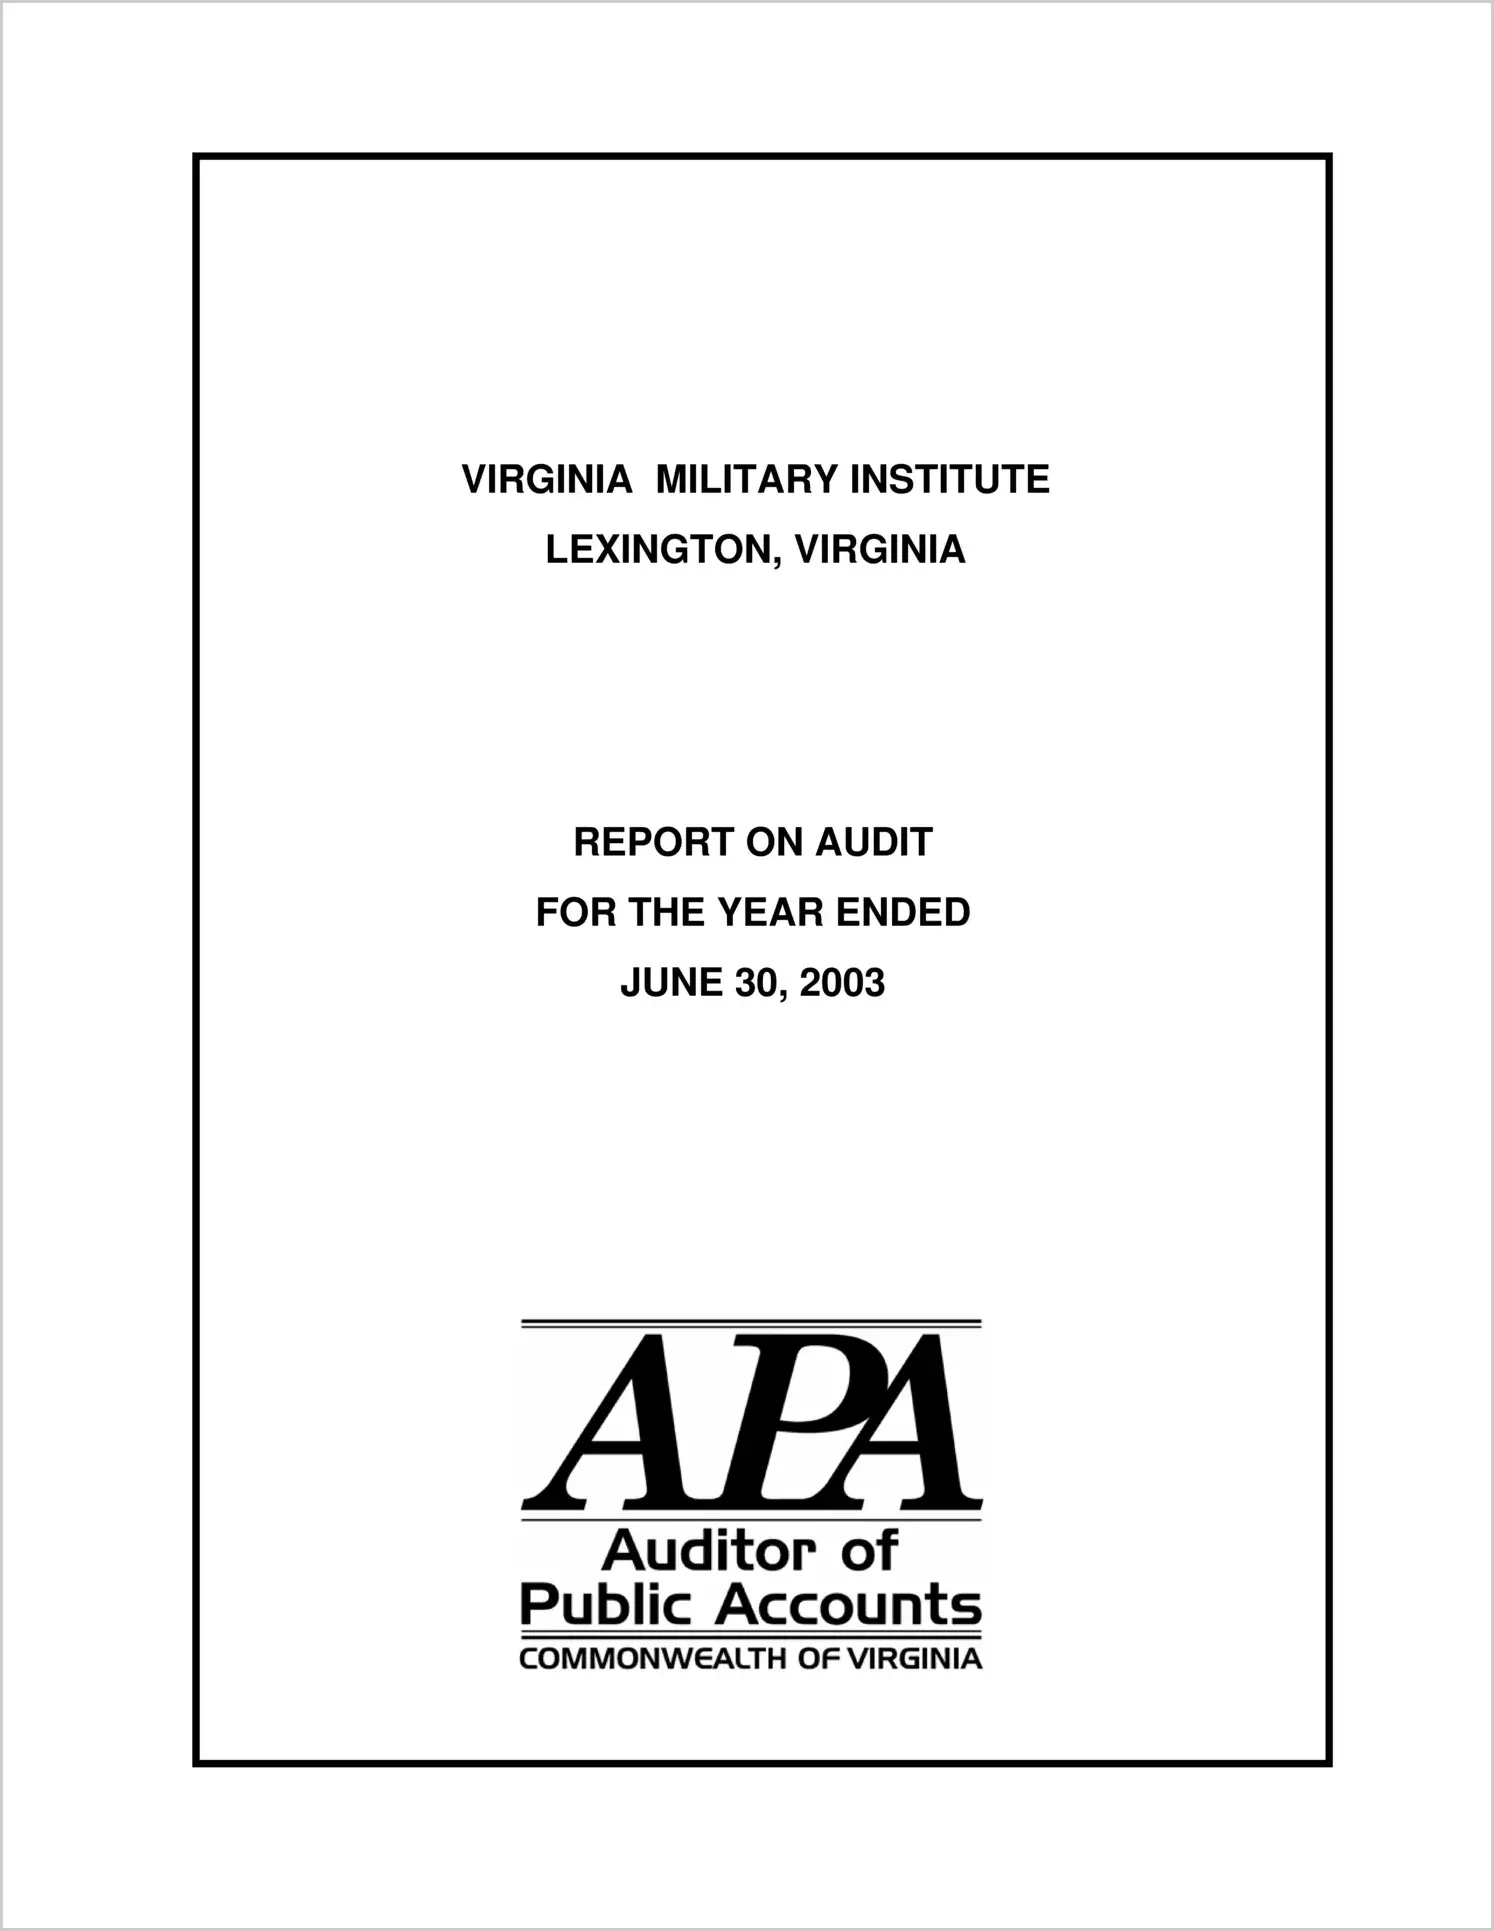 Virginia Military Institute for the year ended June 30, 2003